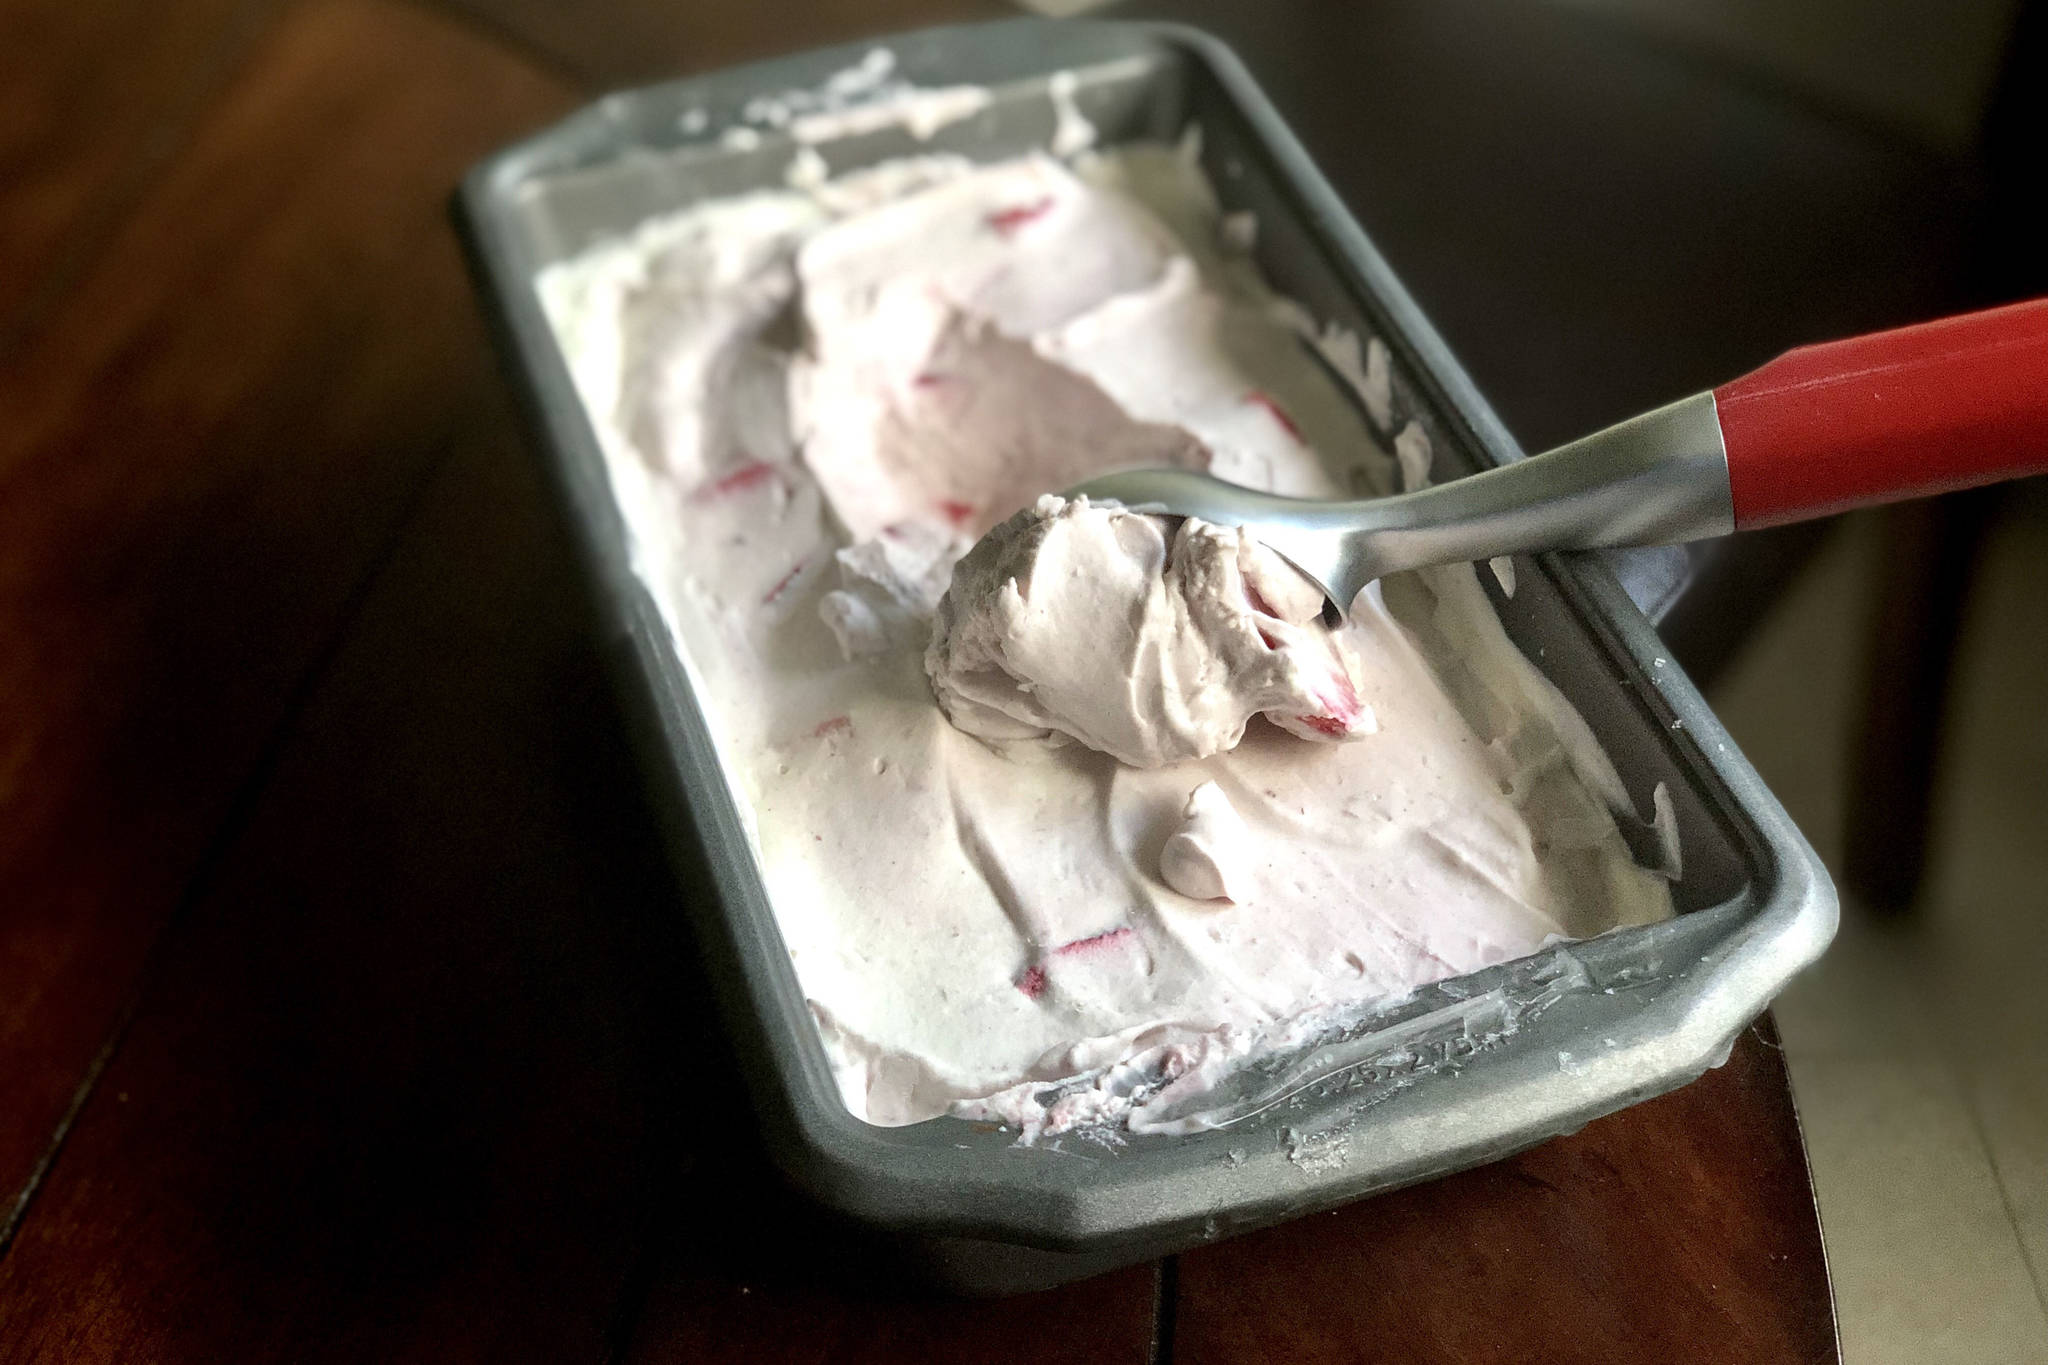 Rhubarb preserves in cardamom spiced ice cream are pictured in this Wednesday, June 10, 2020, in Anchorage, Alaska. (Photo by Victoria Petersen/Peninsula Clarion)